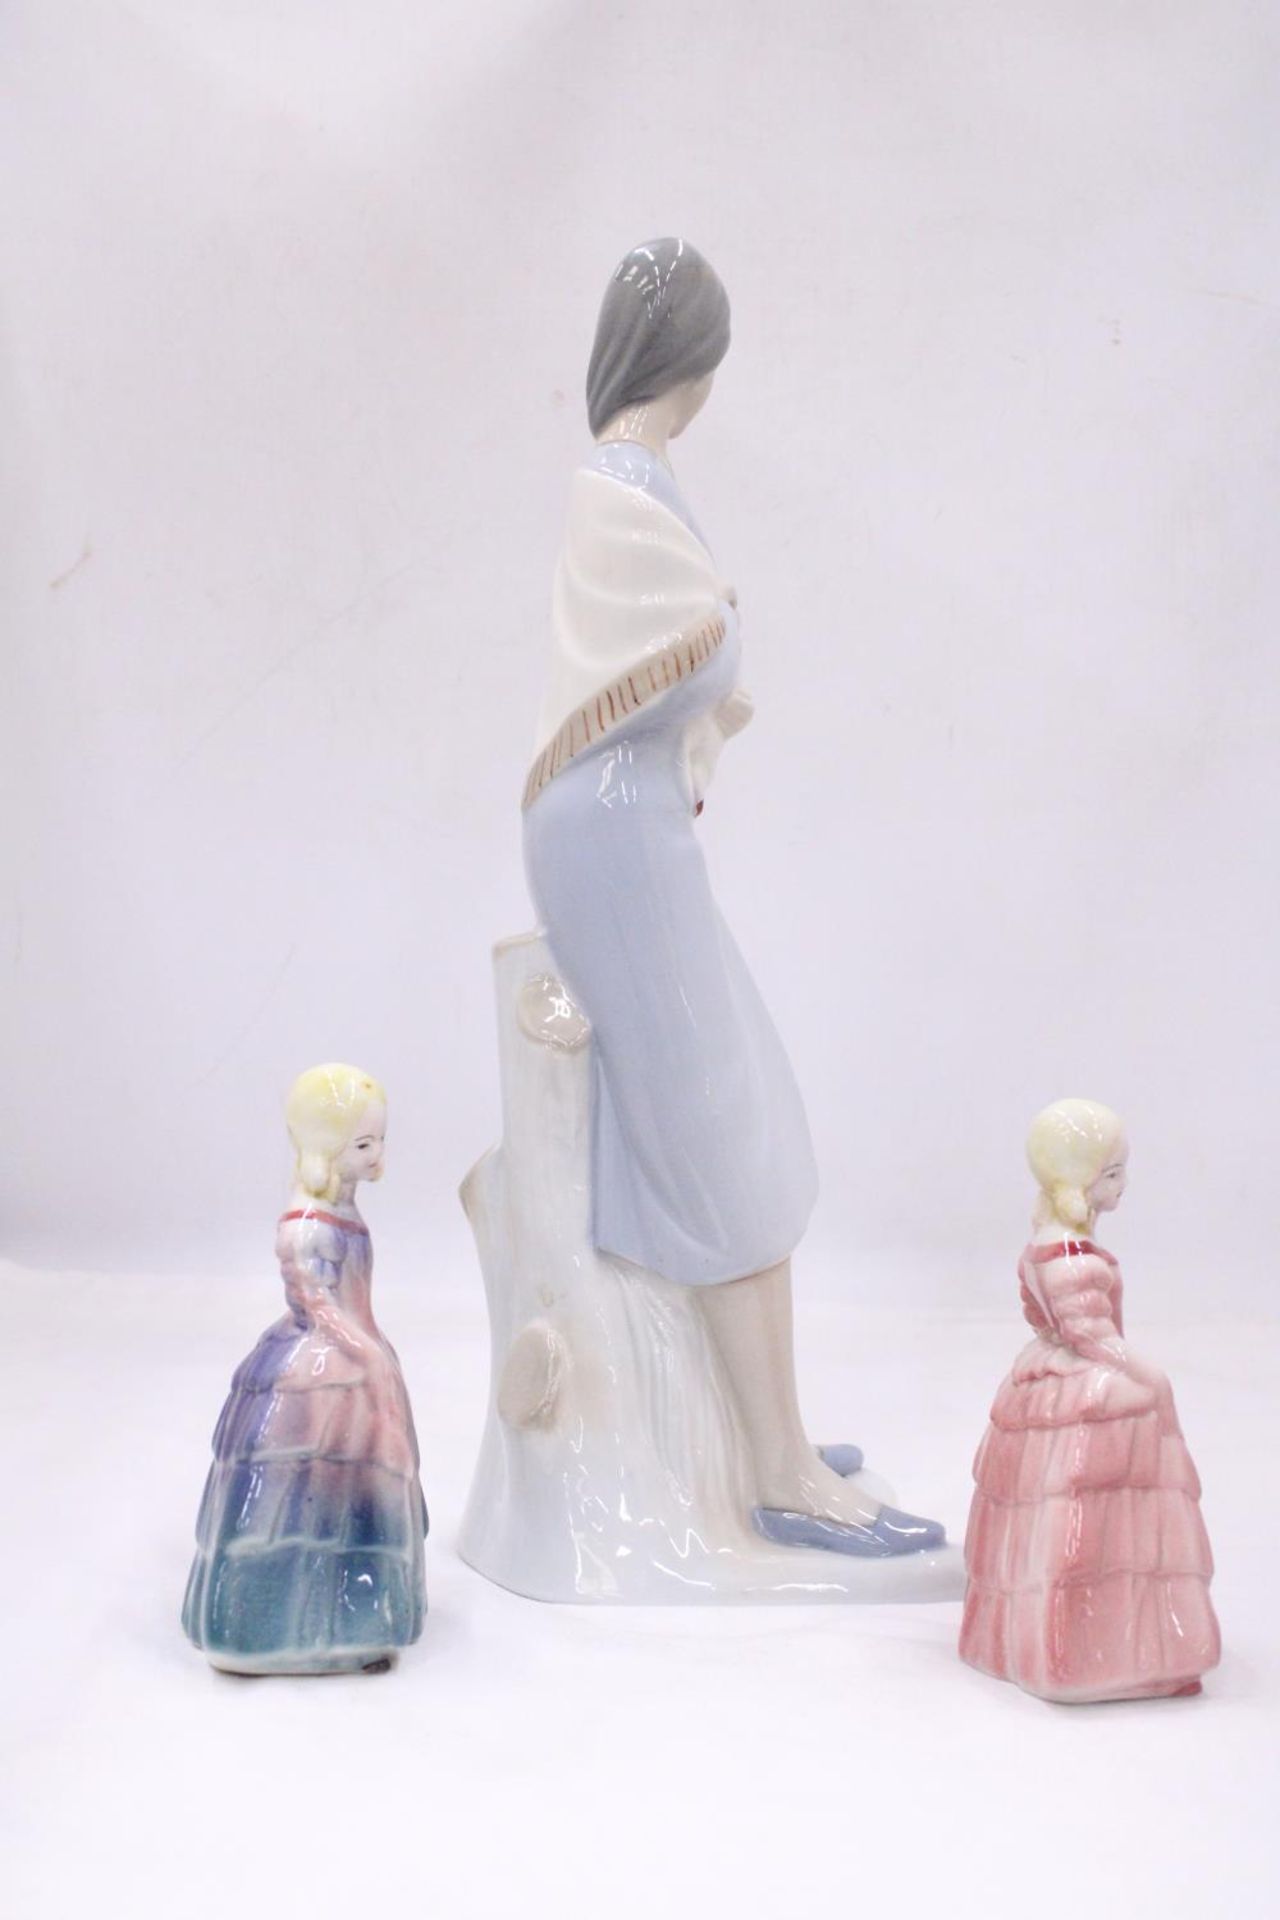 A LLADRO STYLE LADY FIGURE HOLDING A LAMB 38CM TALL, PLUS TWO ROYAL DOULTON STYLE FIGURES - Image 5 of 5